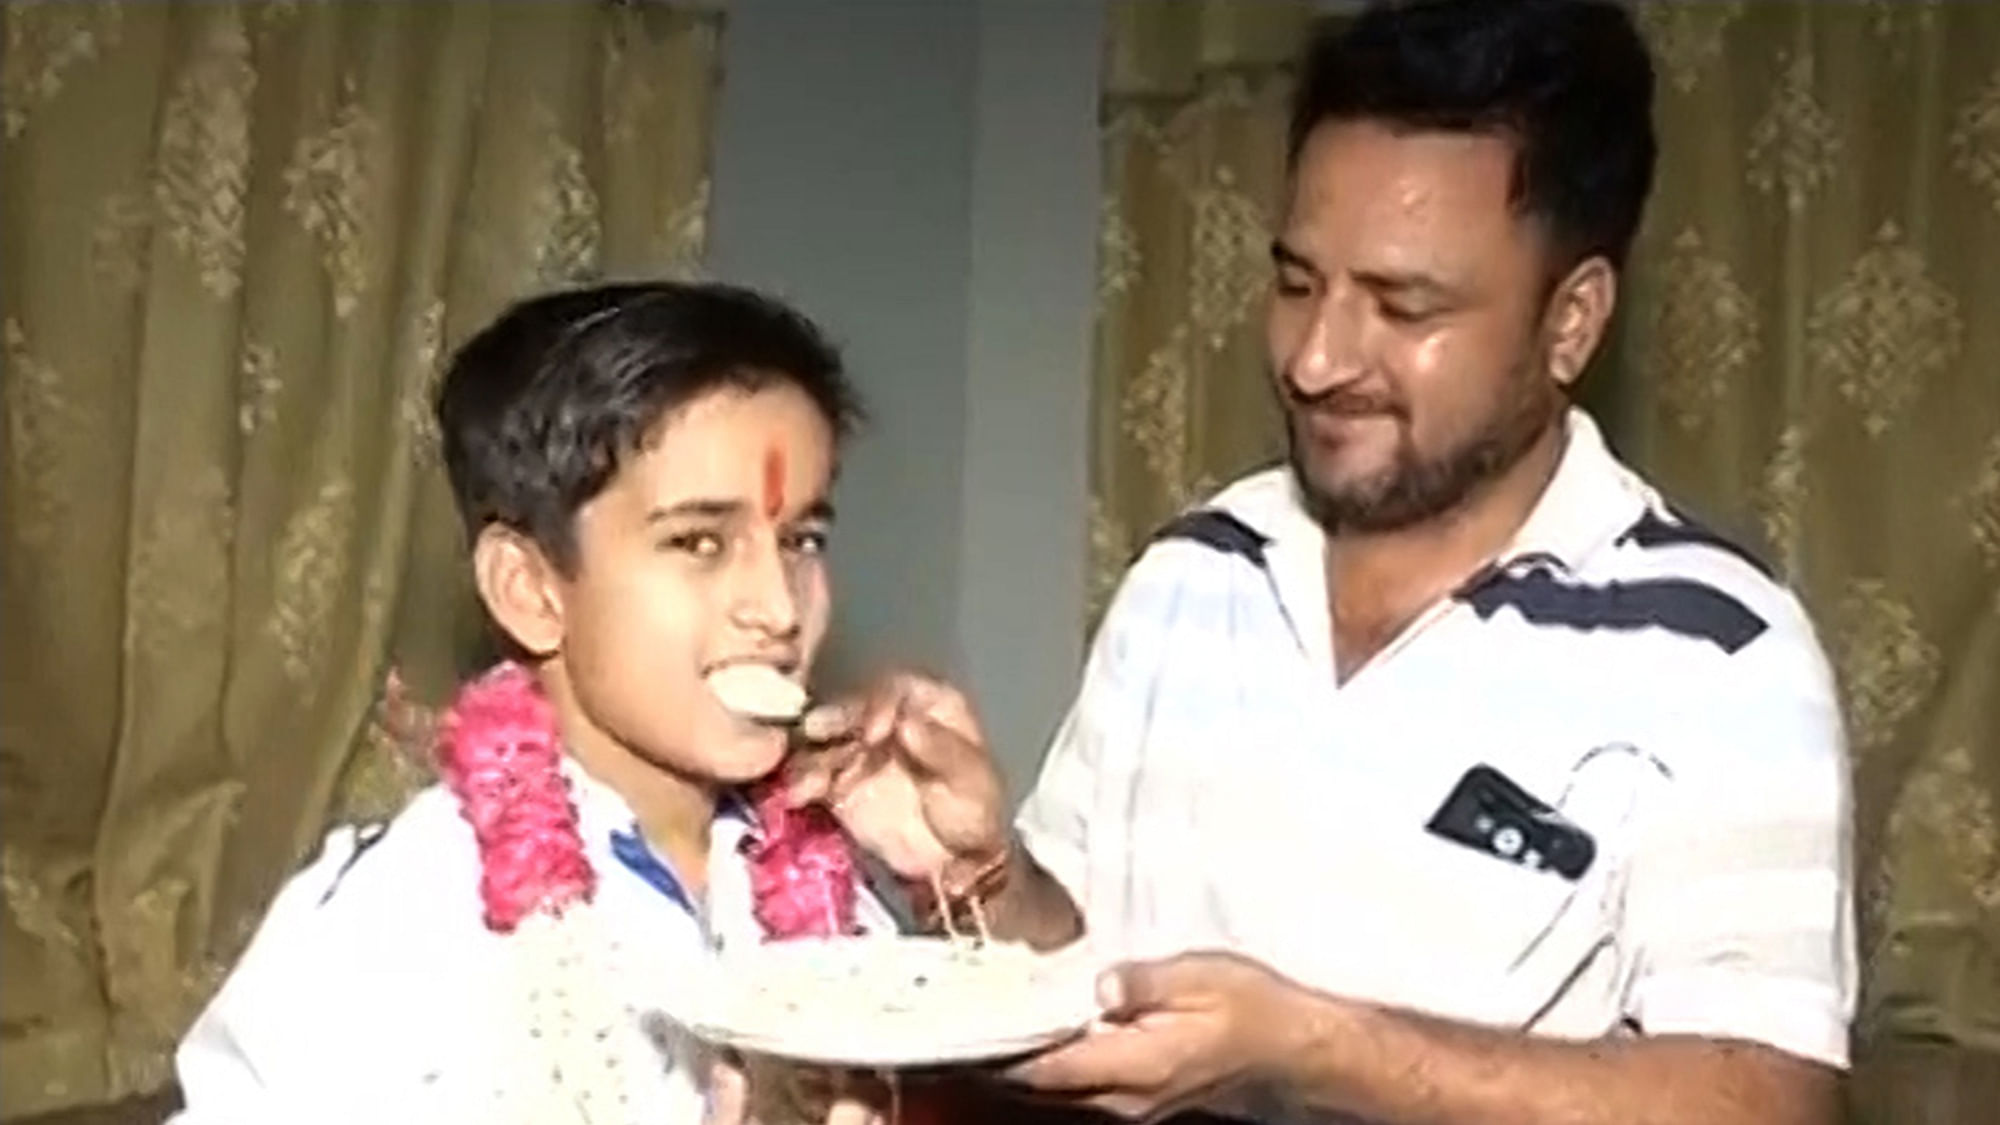 Aabhas Sharma, a child prodigy, has cleared the higher secondary exam conducted by the Rajasthan Board of Secondary Education (RBSE) at the age of 12. (Photo: ANI screengrab